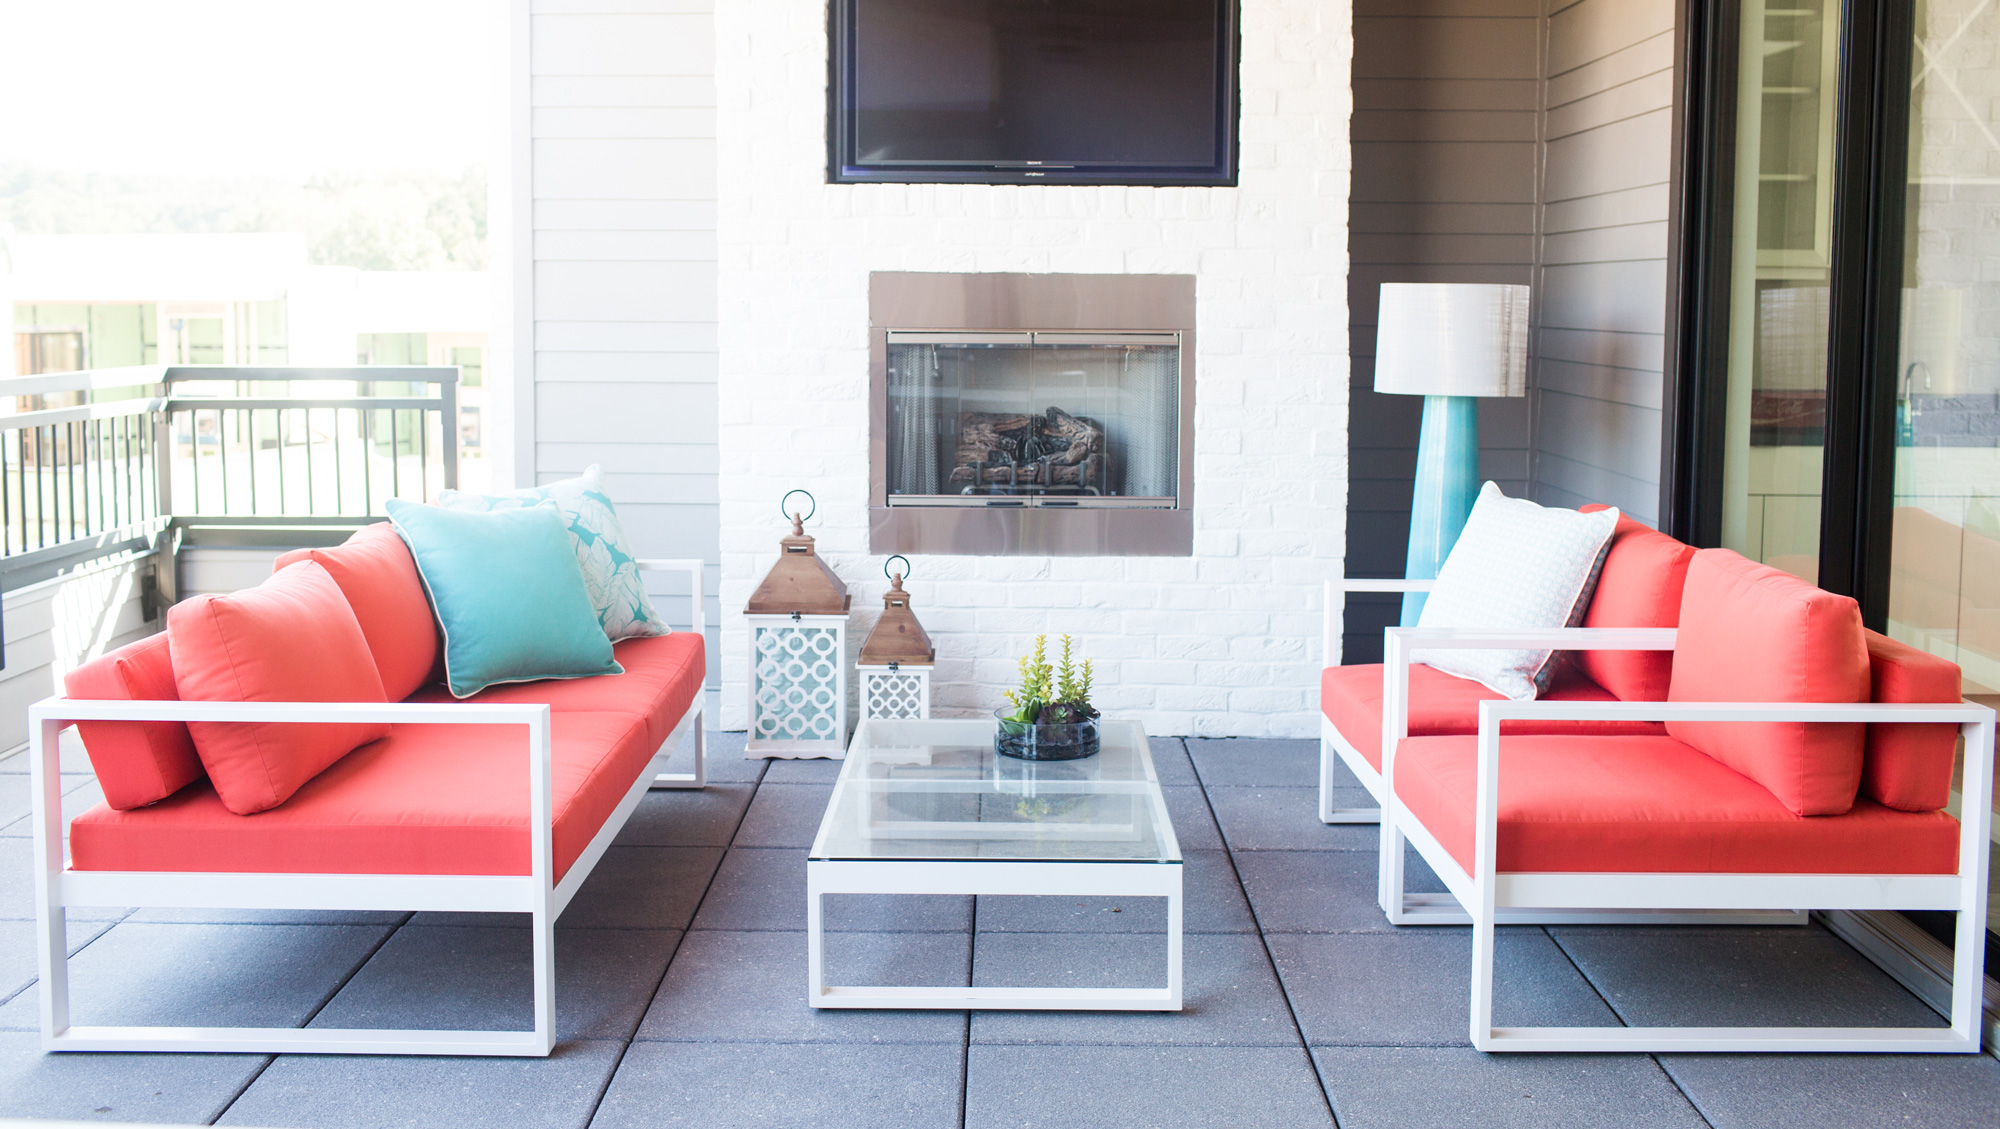 How To Make the Most of Your Small Outdoor Space